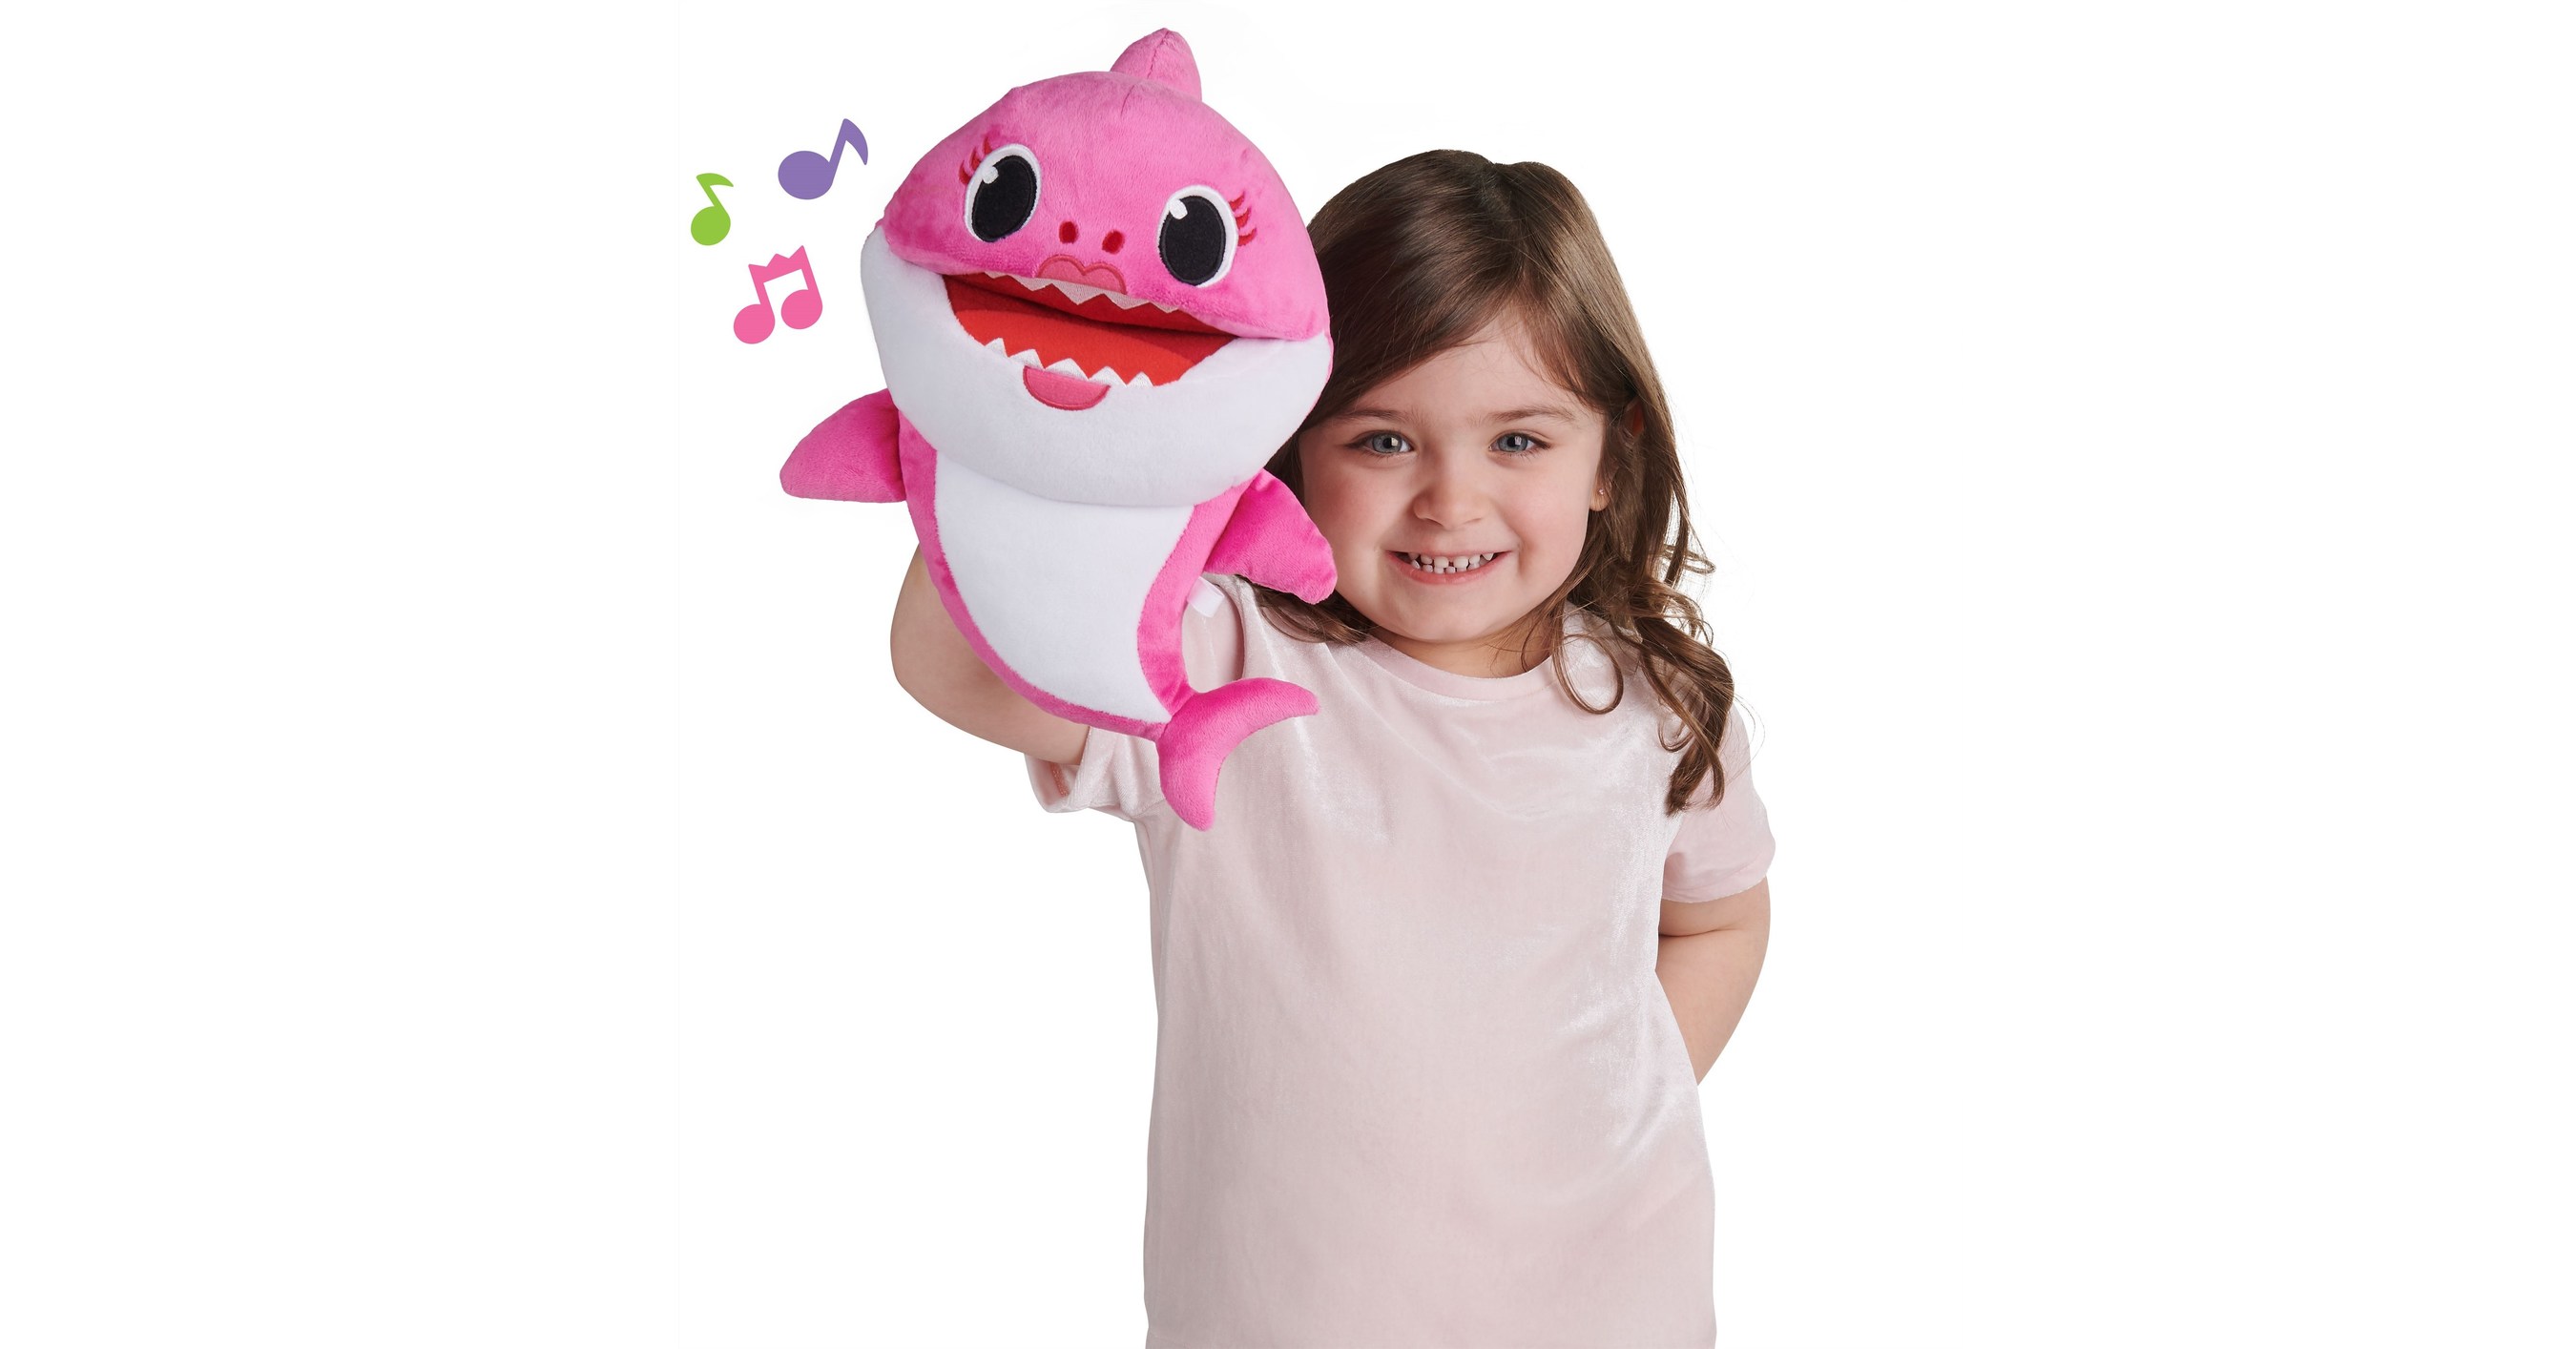 Wowwee Introduces New Pinkfong Baby Shark Song Puppets With Tempo Control The First Ever Baby Shark Fingerlings And More For Holiday 19